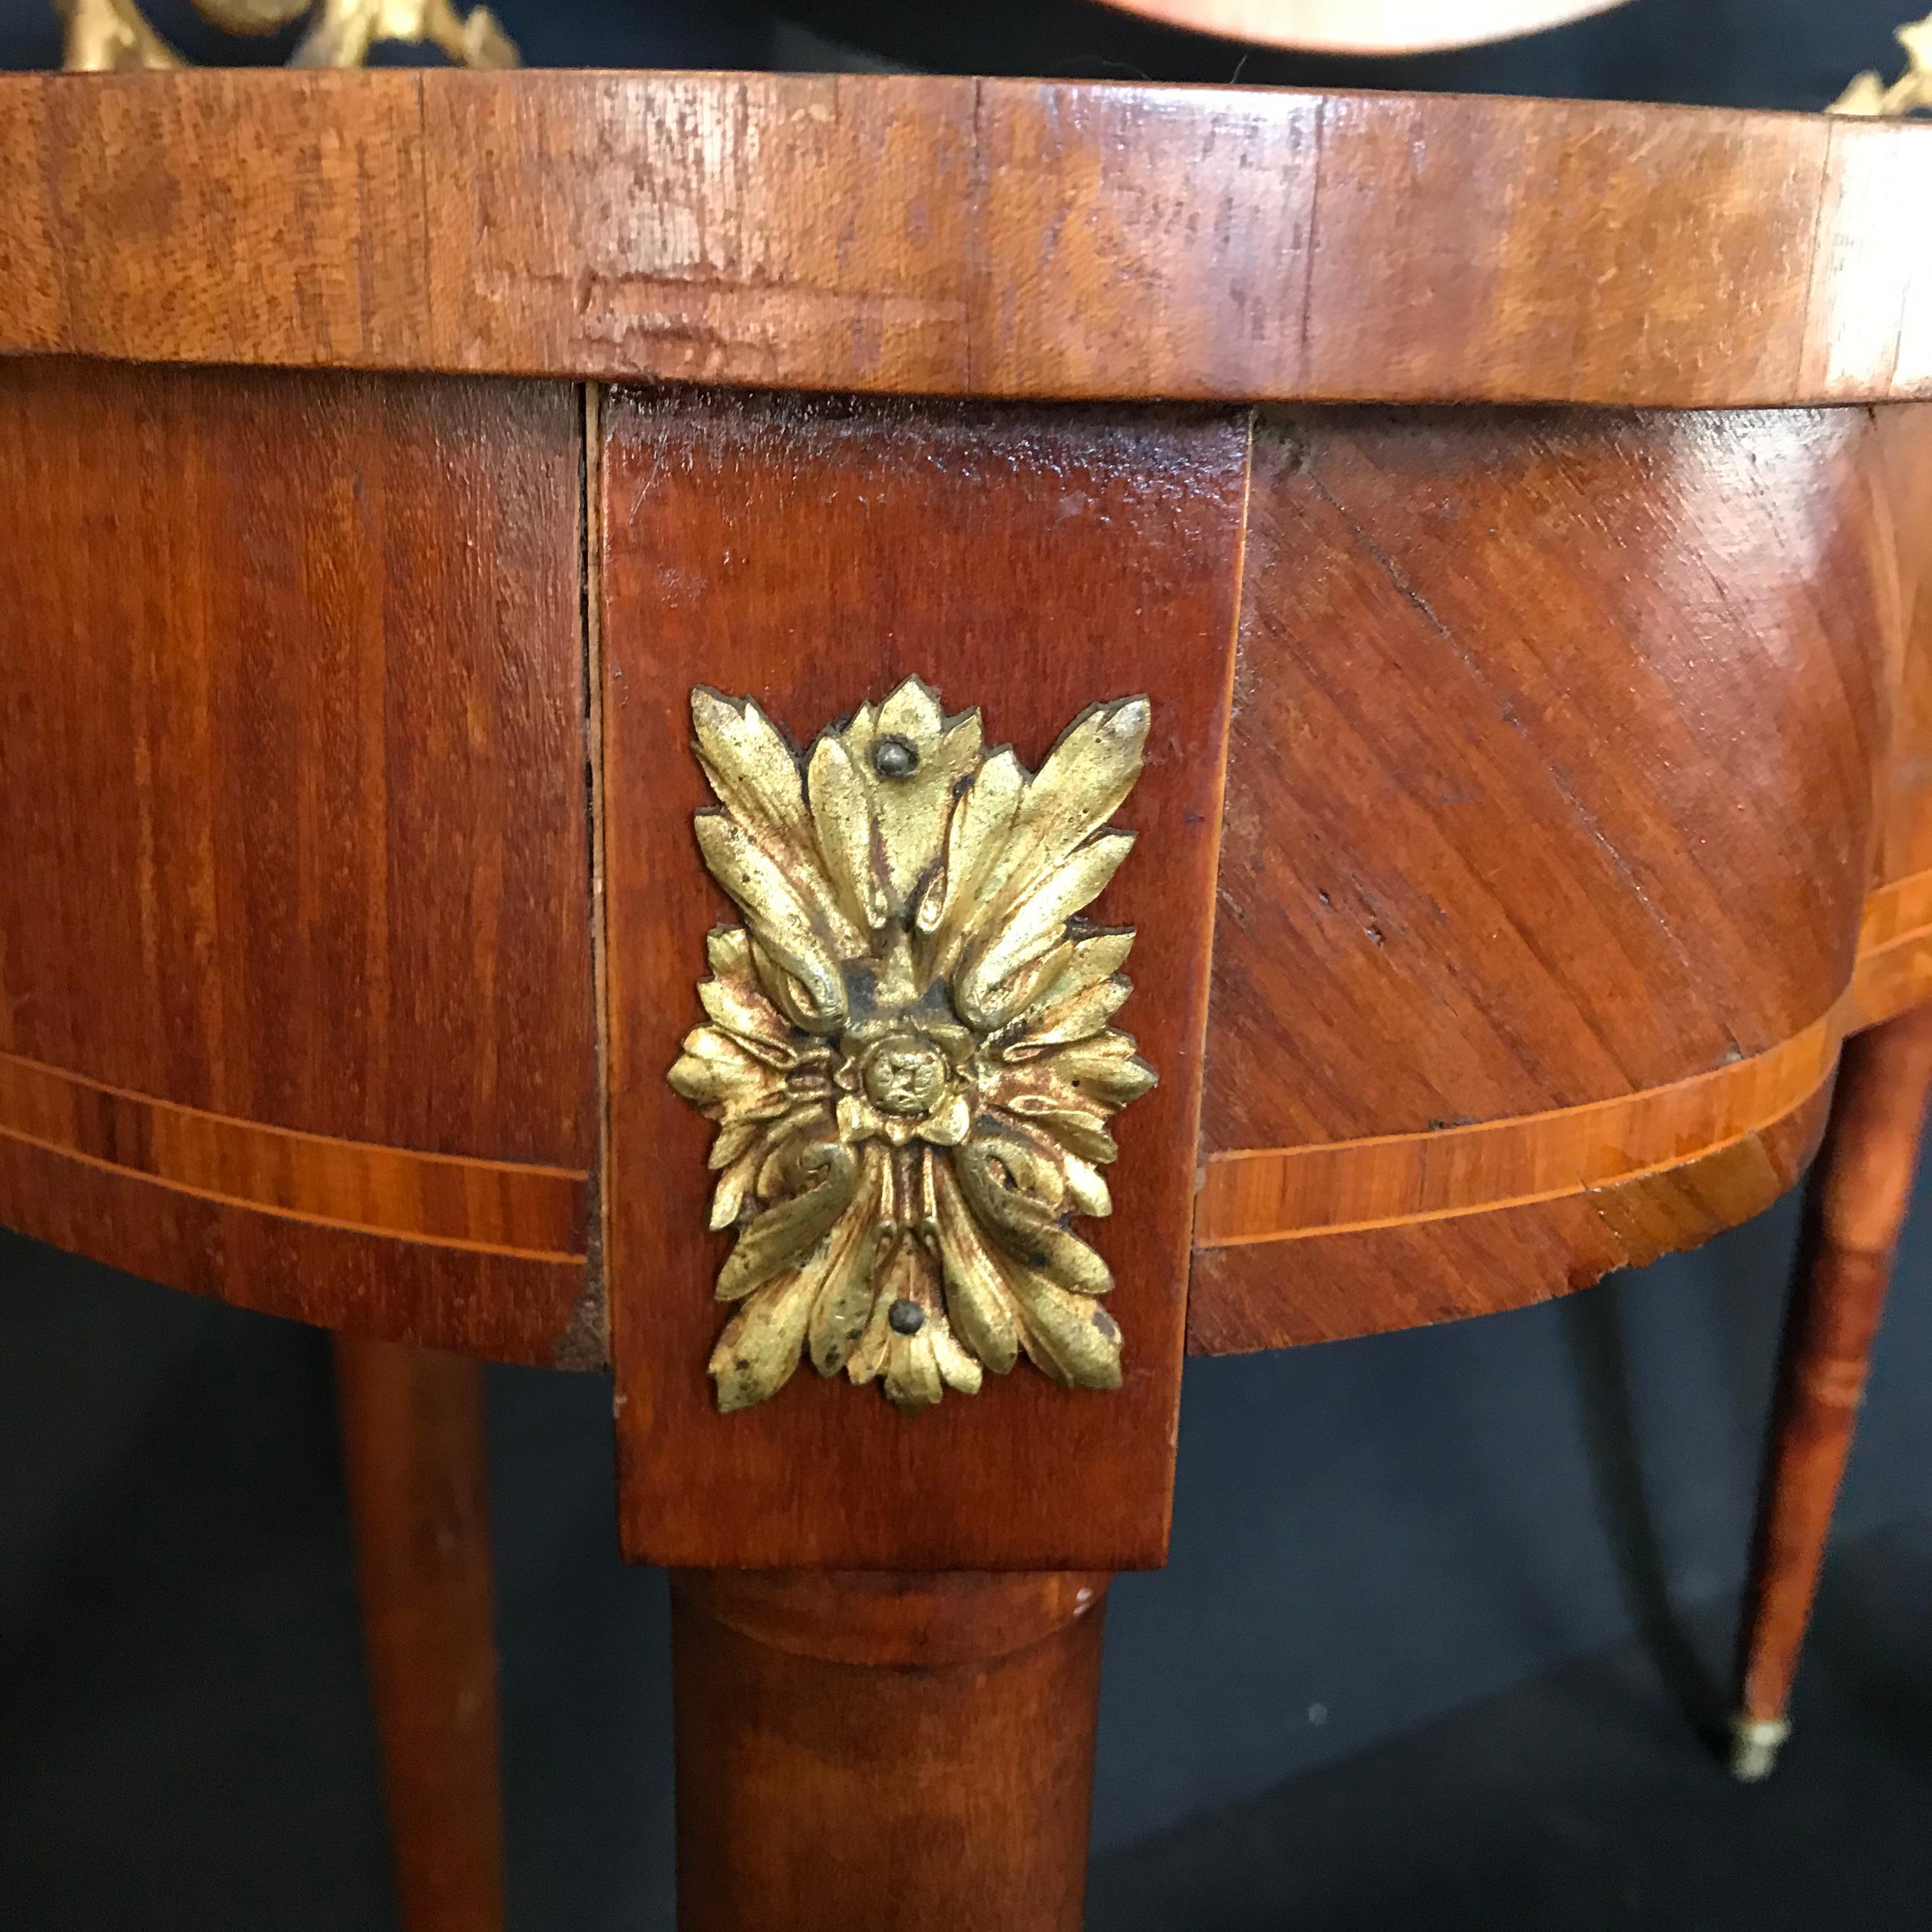 19th Century Romantic French Inlaid Walnut and Bronze Dressing Table with Candelabra Arms